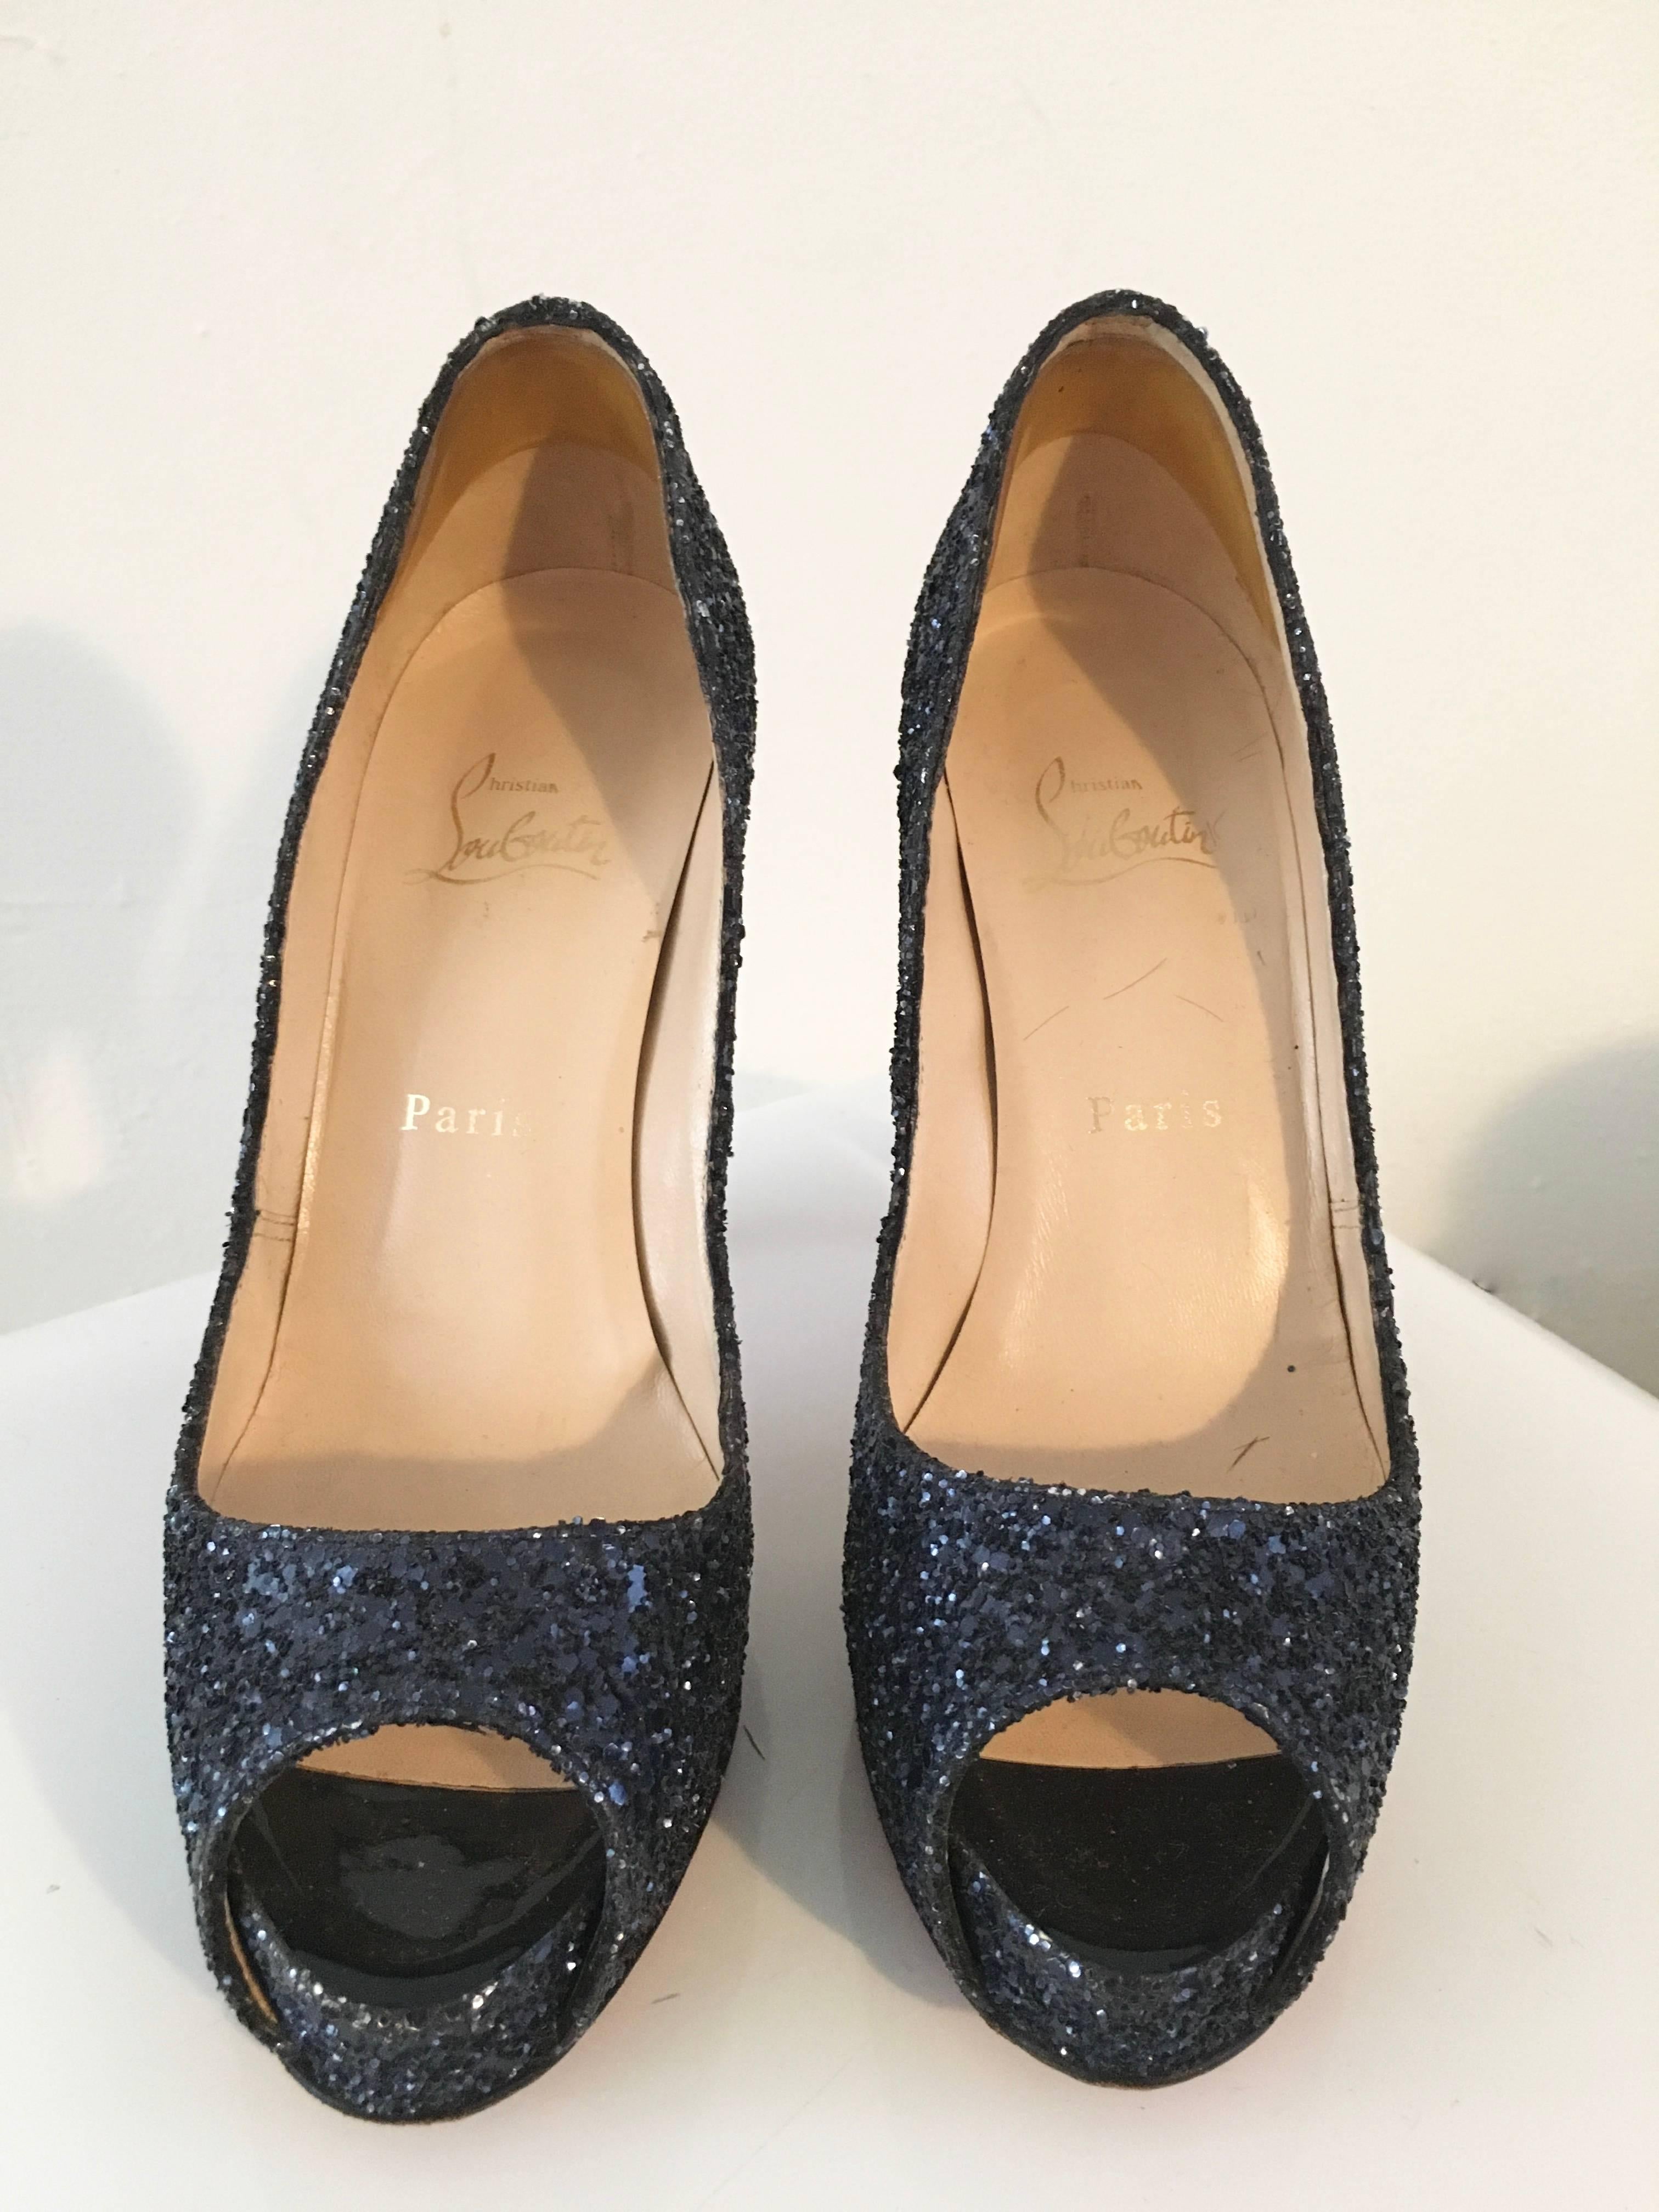 Louboutin Paris navy glitter peep toe platform high heels size 37. 1/2
Perfect to wear with your Dior jeans, YSL halter dress or your vintage Versace pant suit.
These shoes say 